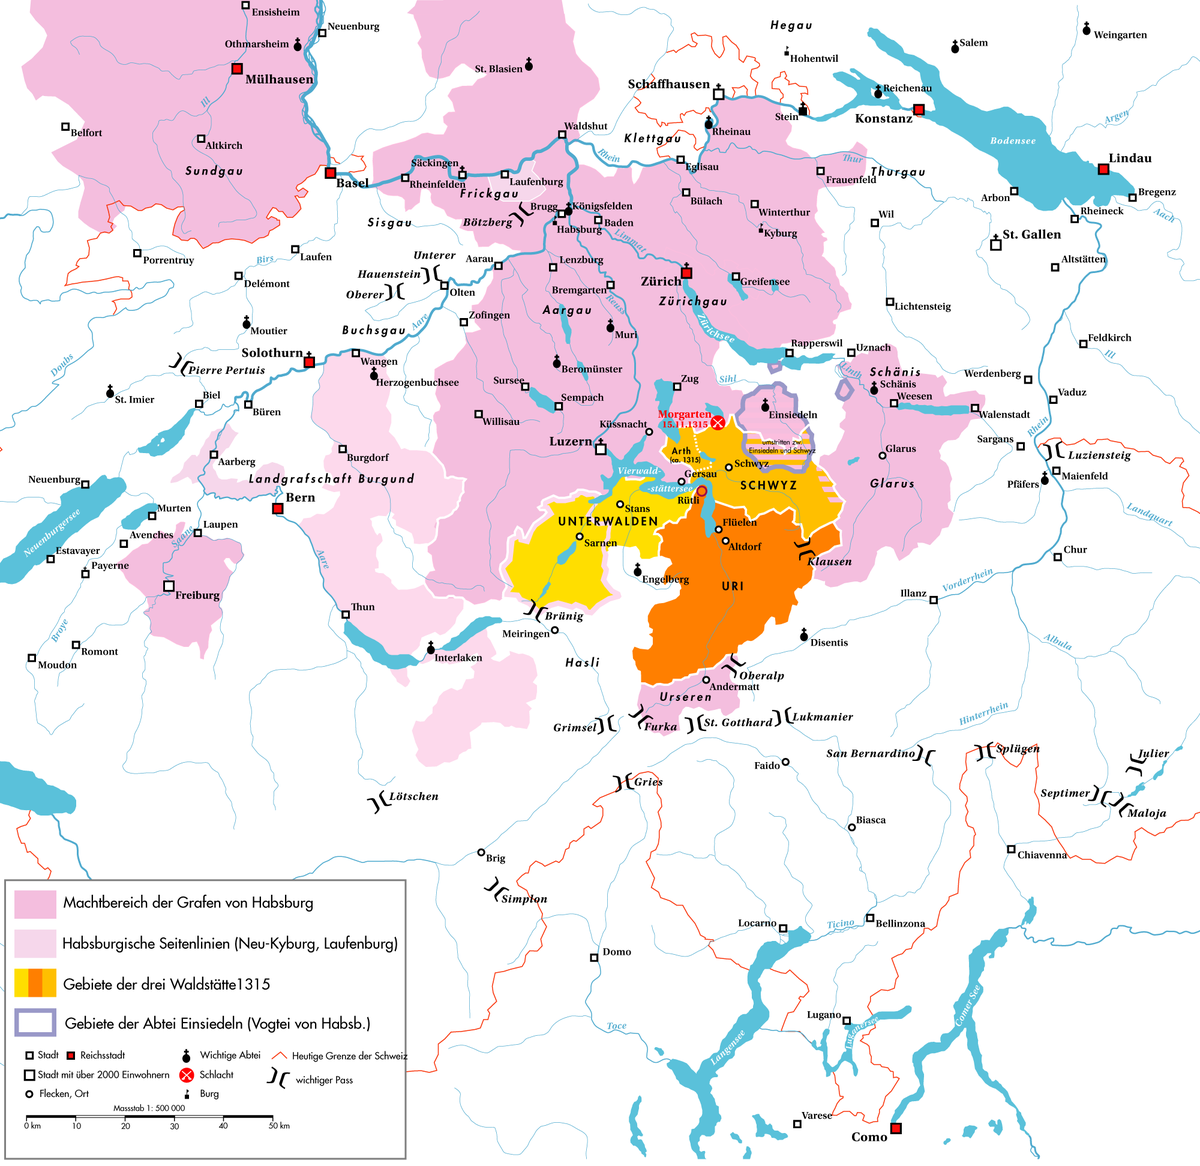 The region near Bern in 1315, with Habsburg ruled area marked in fuchsia (?), taken from https://en.wikipedia.org/wiki/Growth_of_the_Old_Swiss_Confederacy#/media/File:Historische_Karte_CH_1315.png